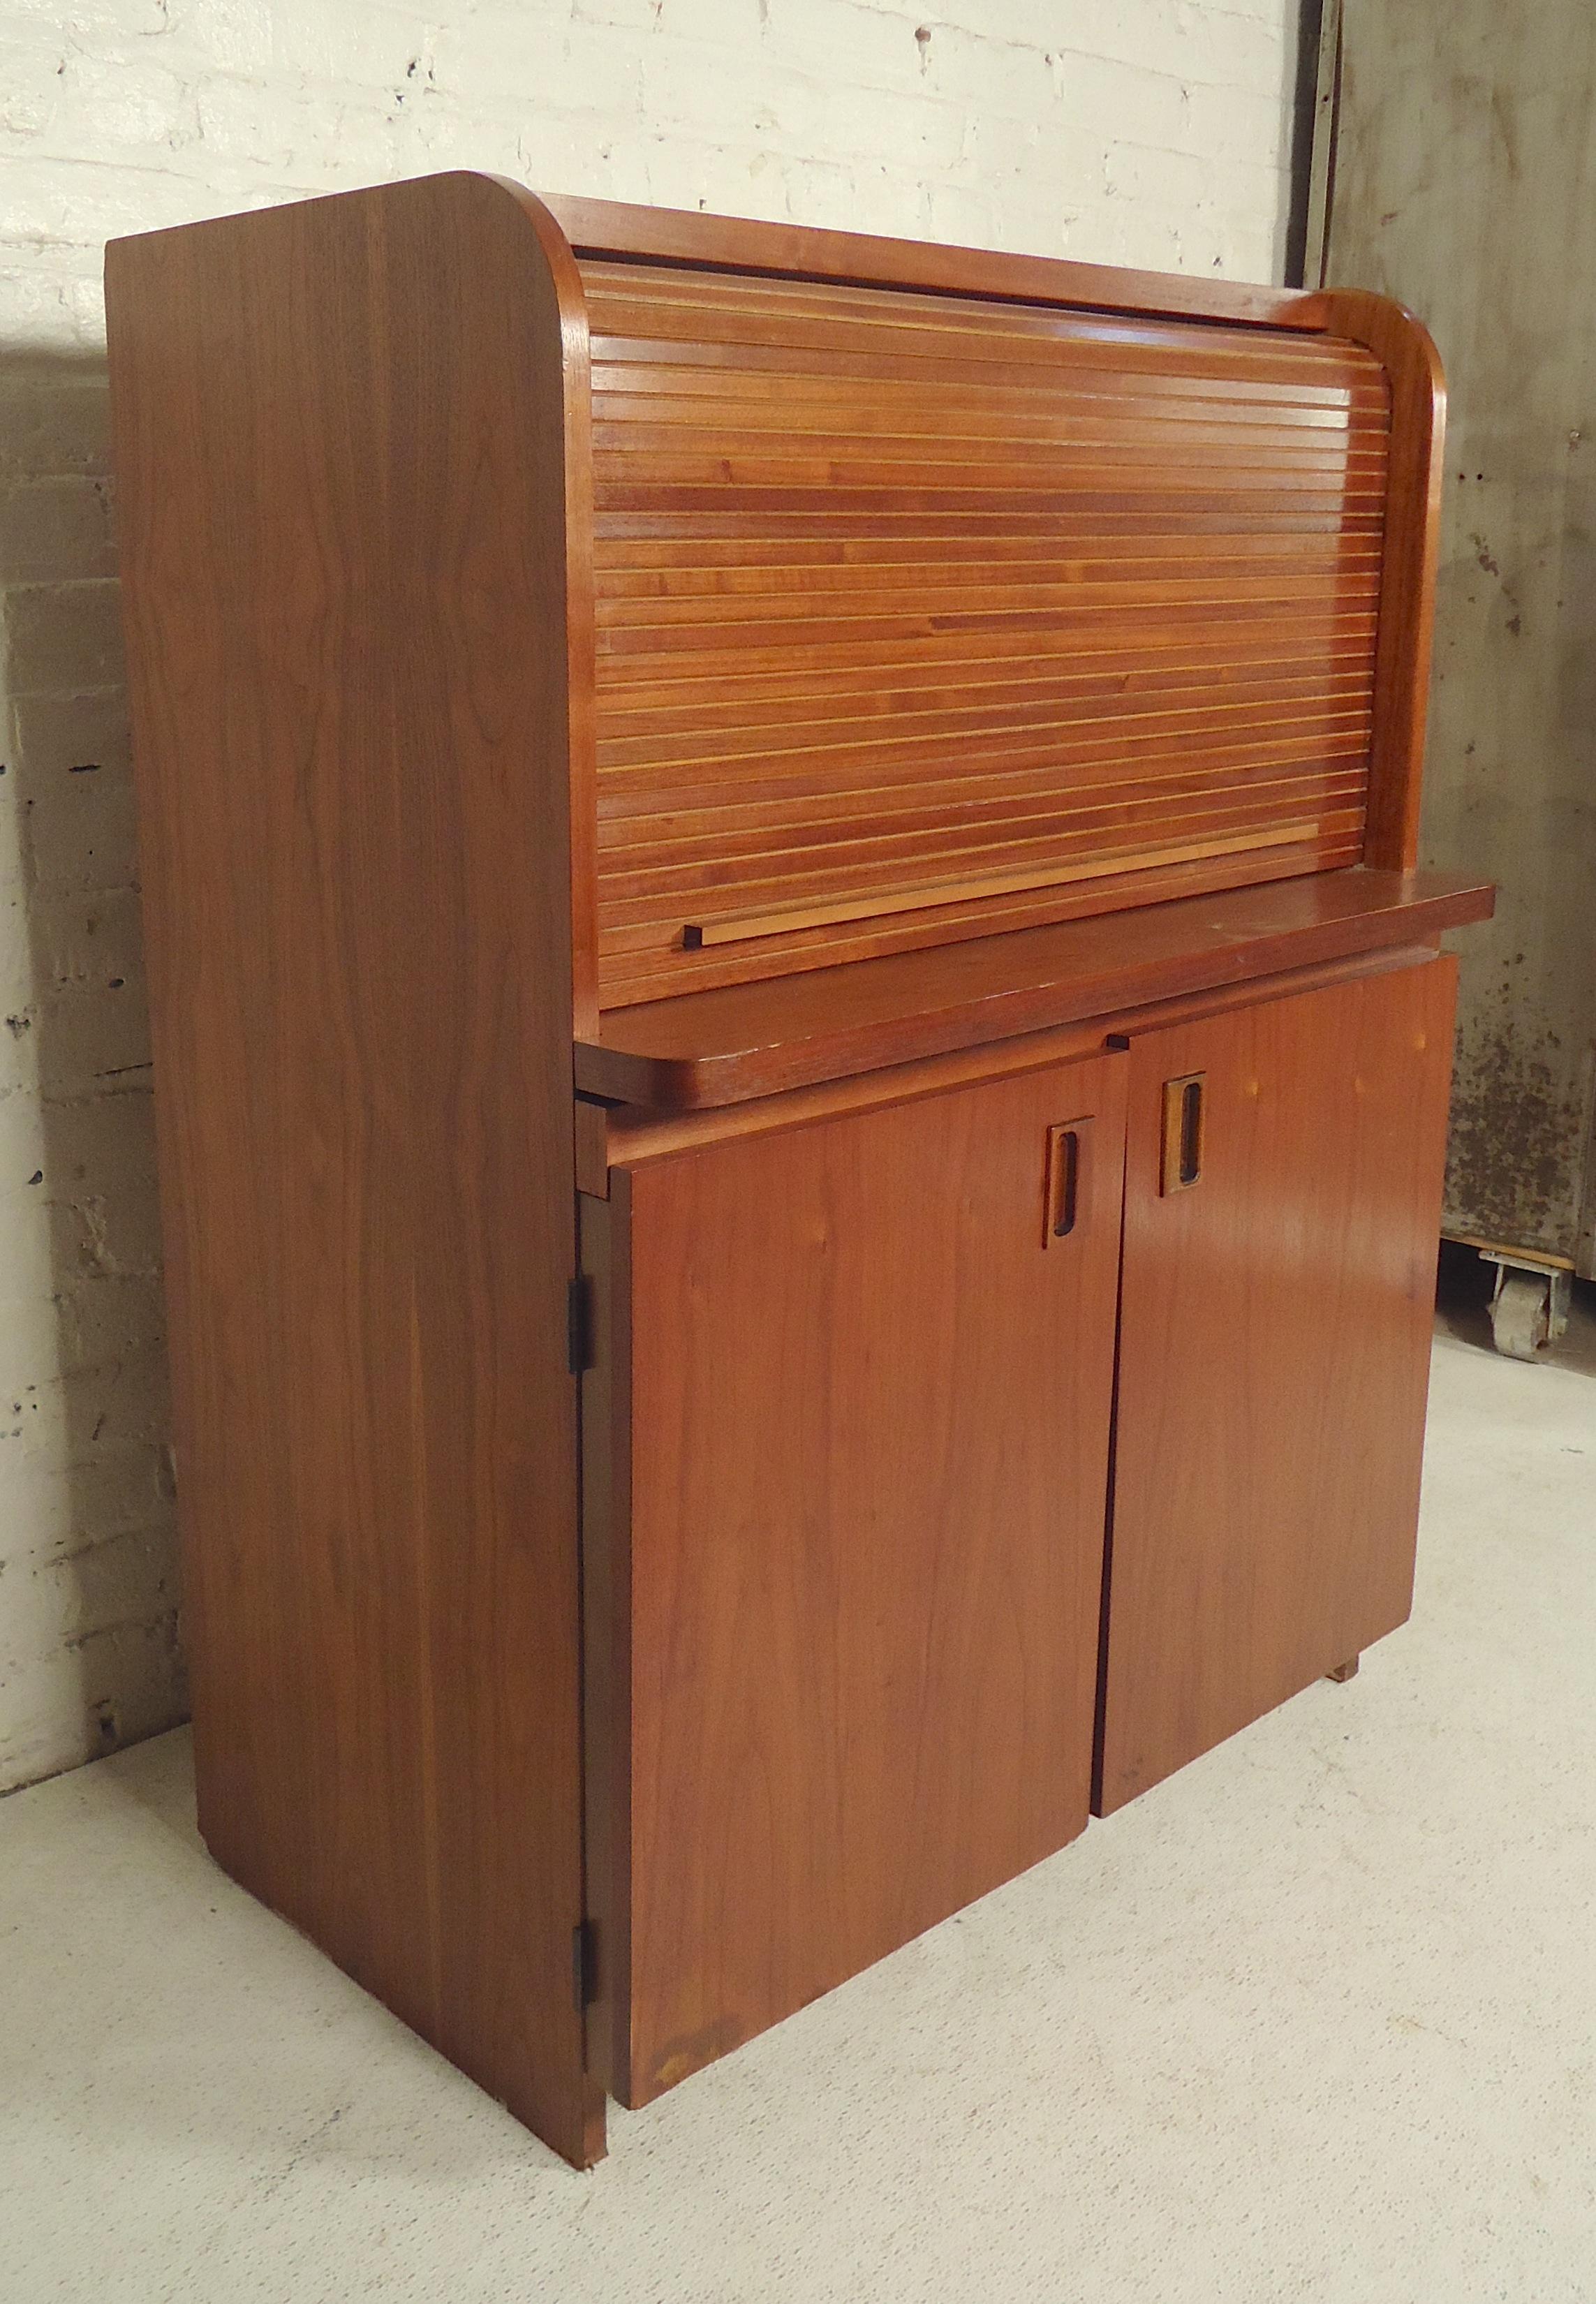 Teak wood cabinet with tambour door top, pull out desk top, and bottom storage space. Great office option for small rooms.

(Please confirm item location, NY or NJ, with dealer).
 